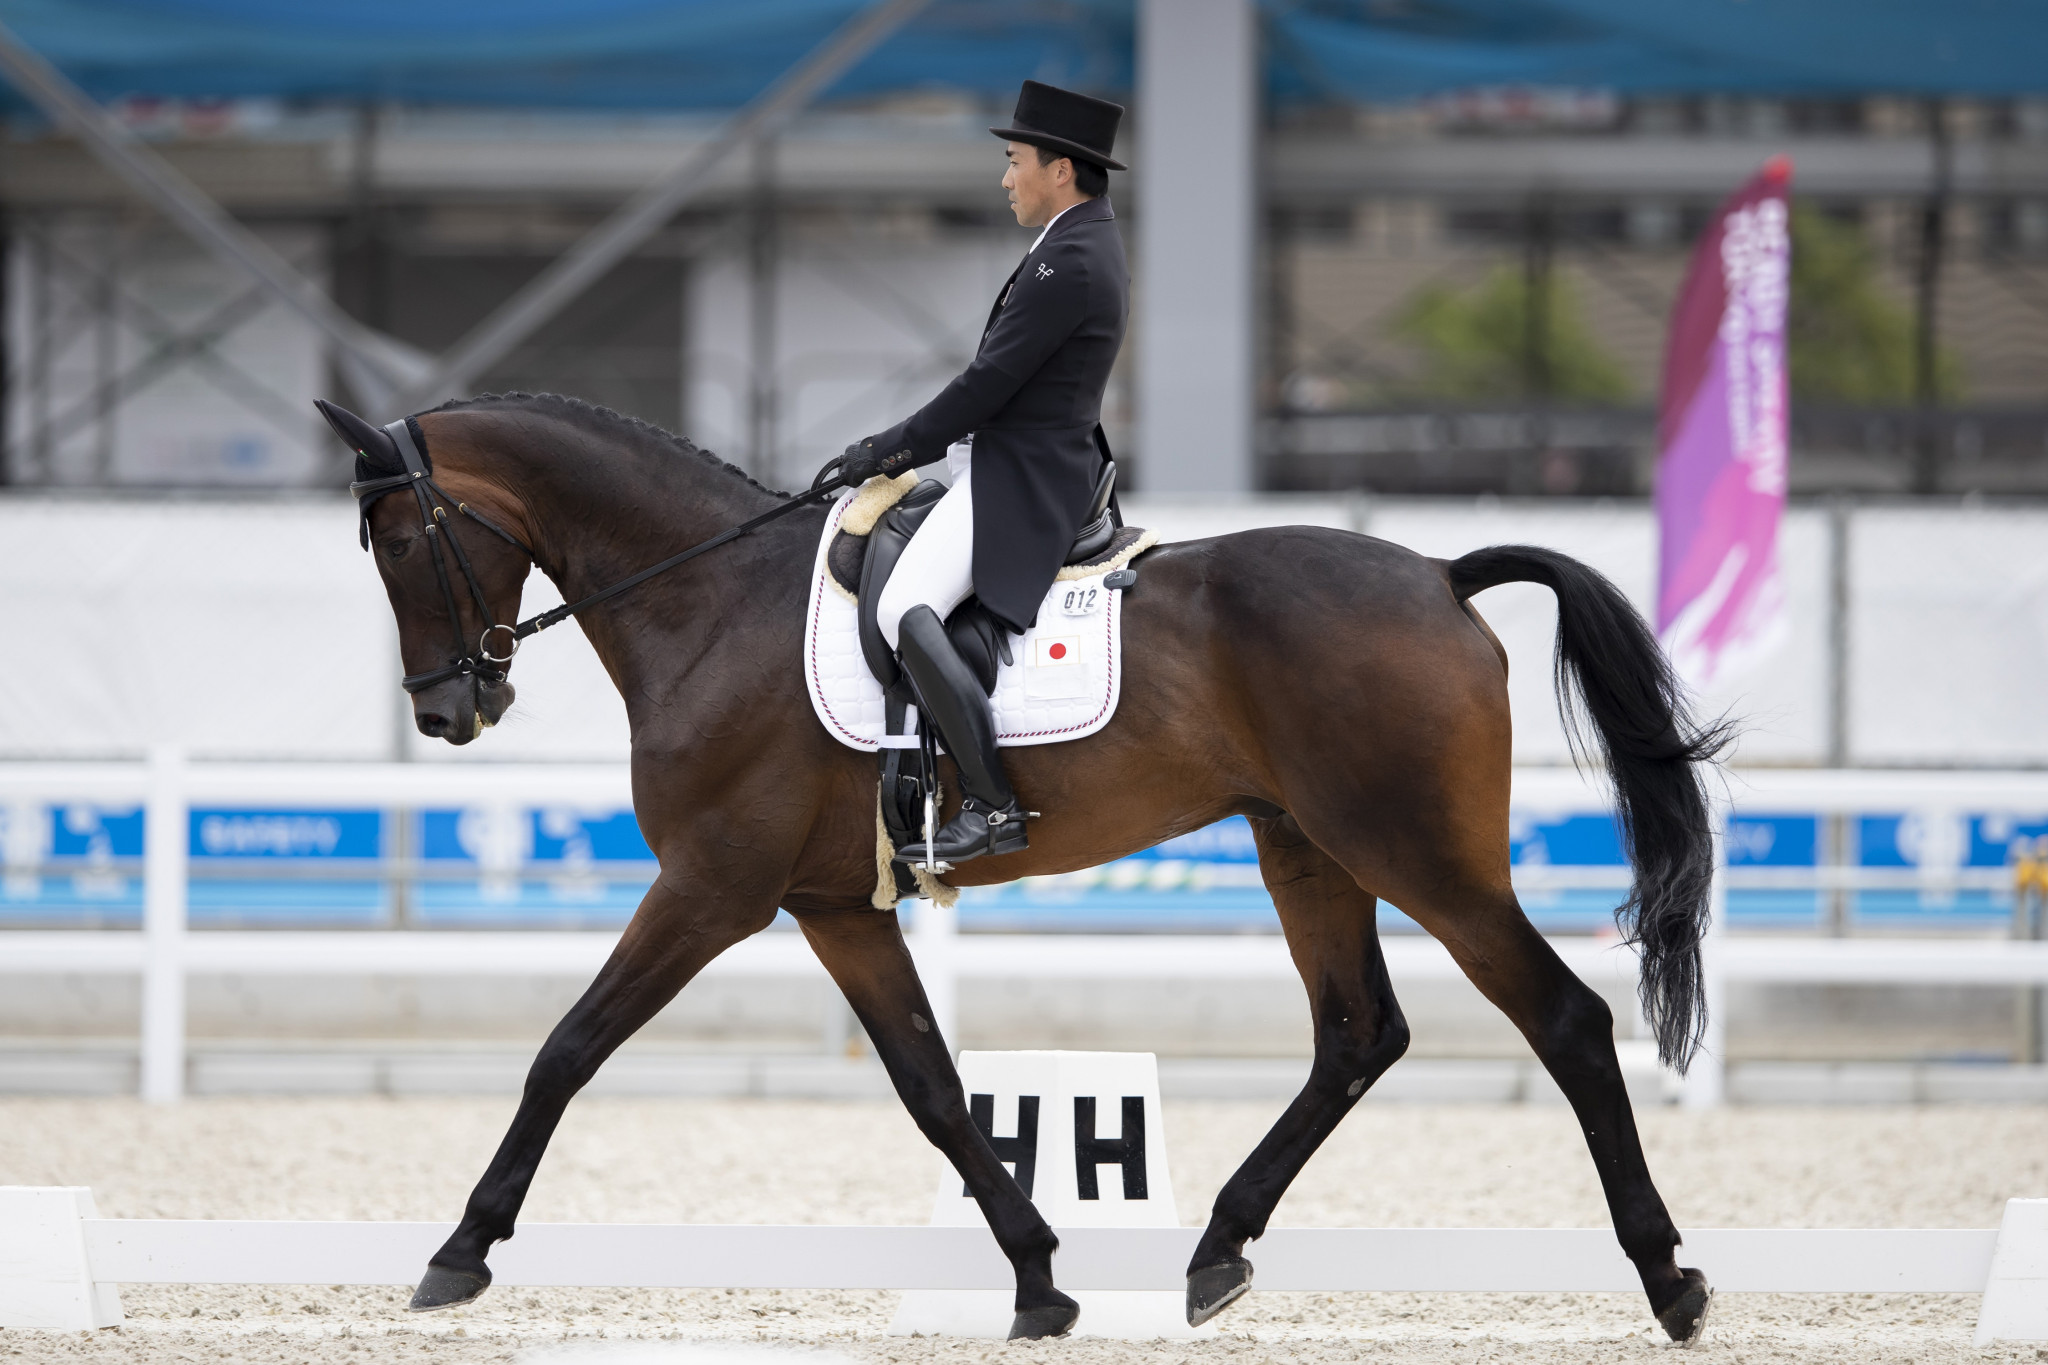 Japan’s Yoshiaki Oiwa has put down a strong marker for the home side by taking the early lead after today’s dressage phase at the equestrian test event for the Tokyo 2020 Olympic Games ©FEI/Yusuke Nakanishi